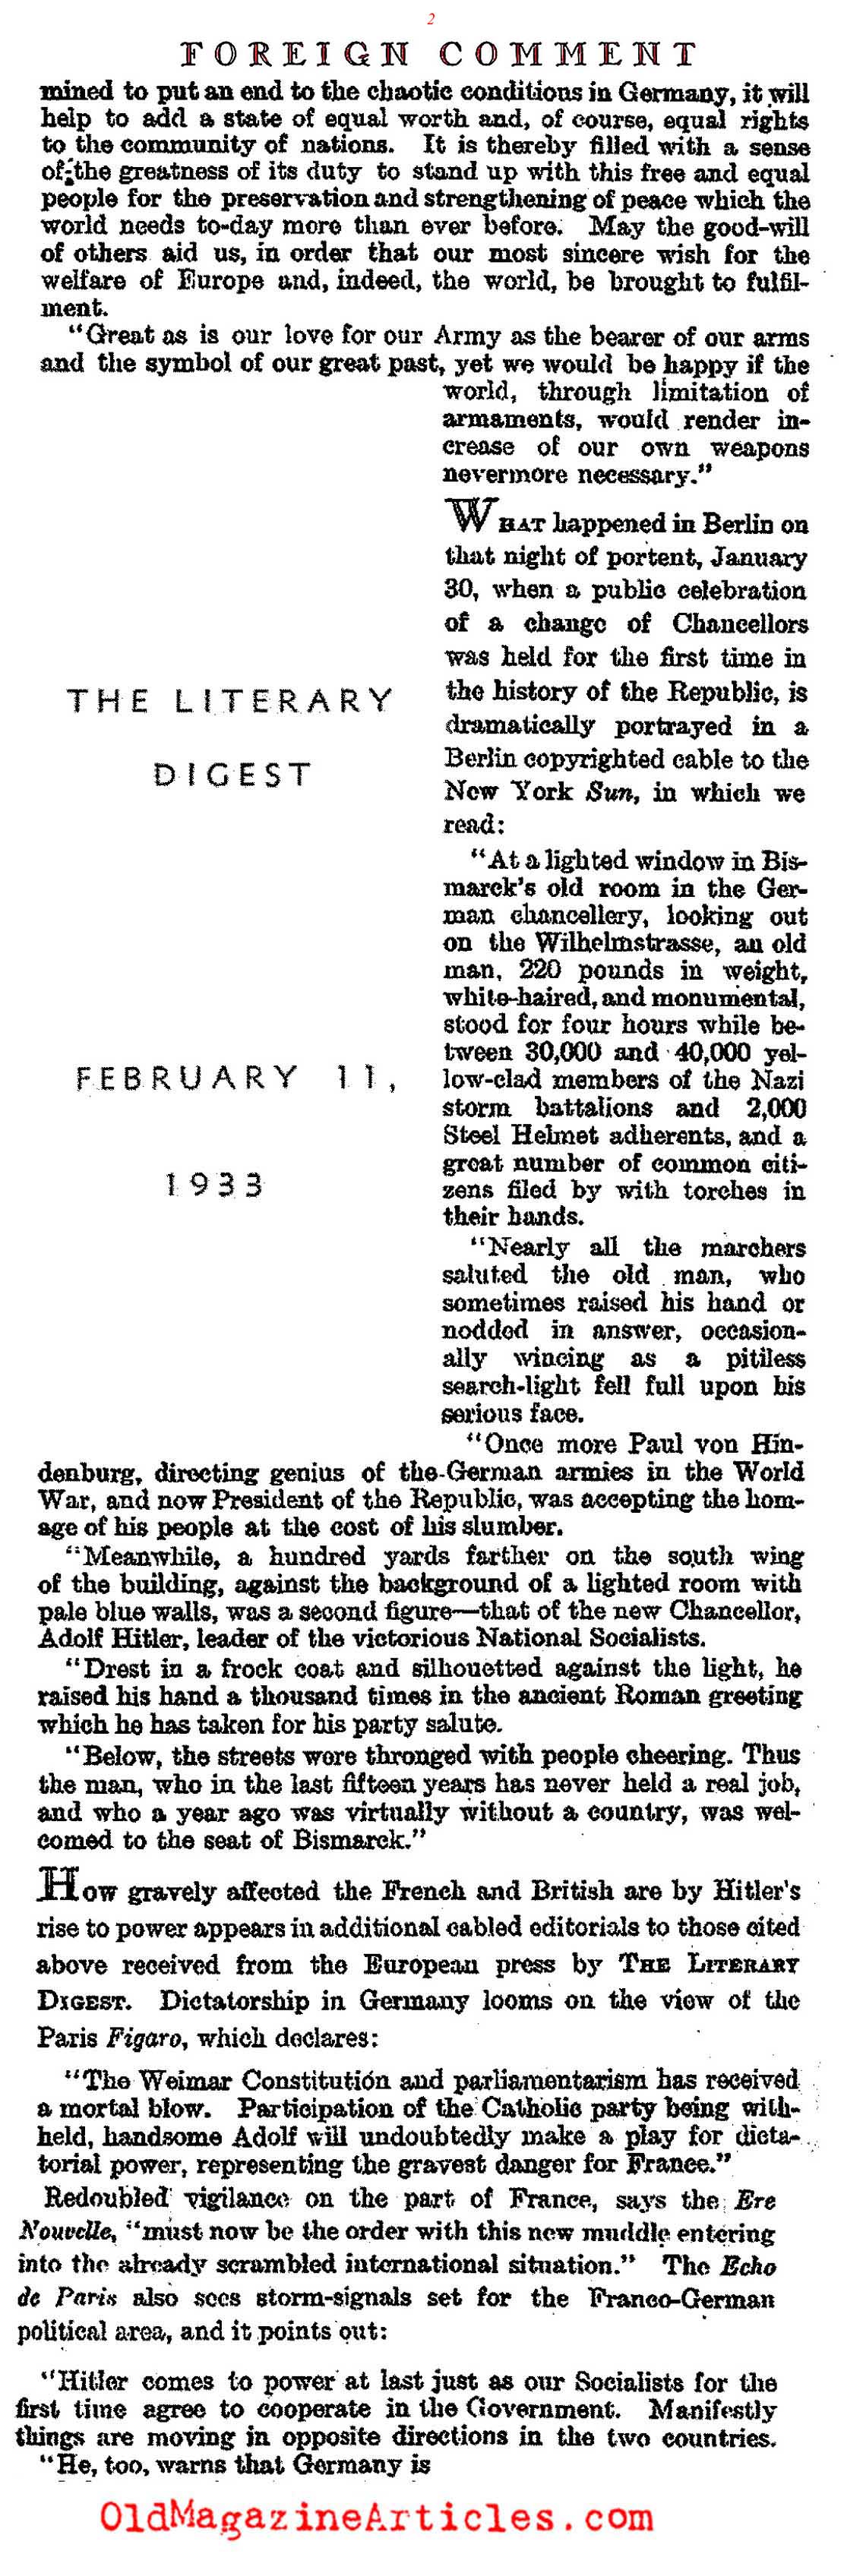 1933: Hitler Comes to Power (Literary Digest, 1933)